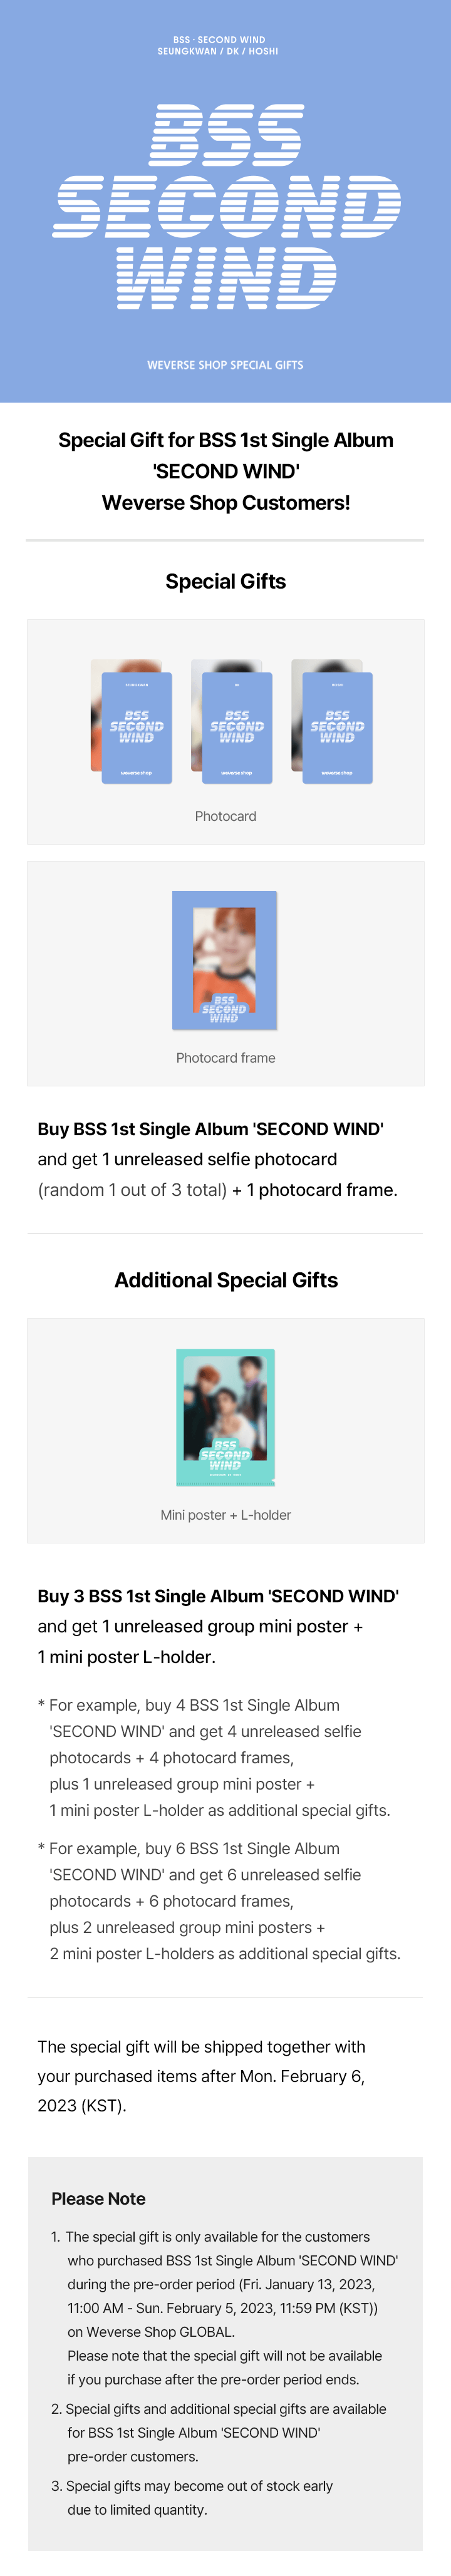 UK Free Tracked shipping for SEVENTEEN BSS SECOND WIND Pre-order. Weverse Ktown4u pre-order benefit POB photocard. SVT Album sales count towards Hanteo & Circle Korean charts. Selling a huge collection of kpop albums & official merch at the best online kpop store marketplace in Manchester UK.